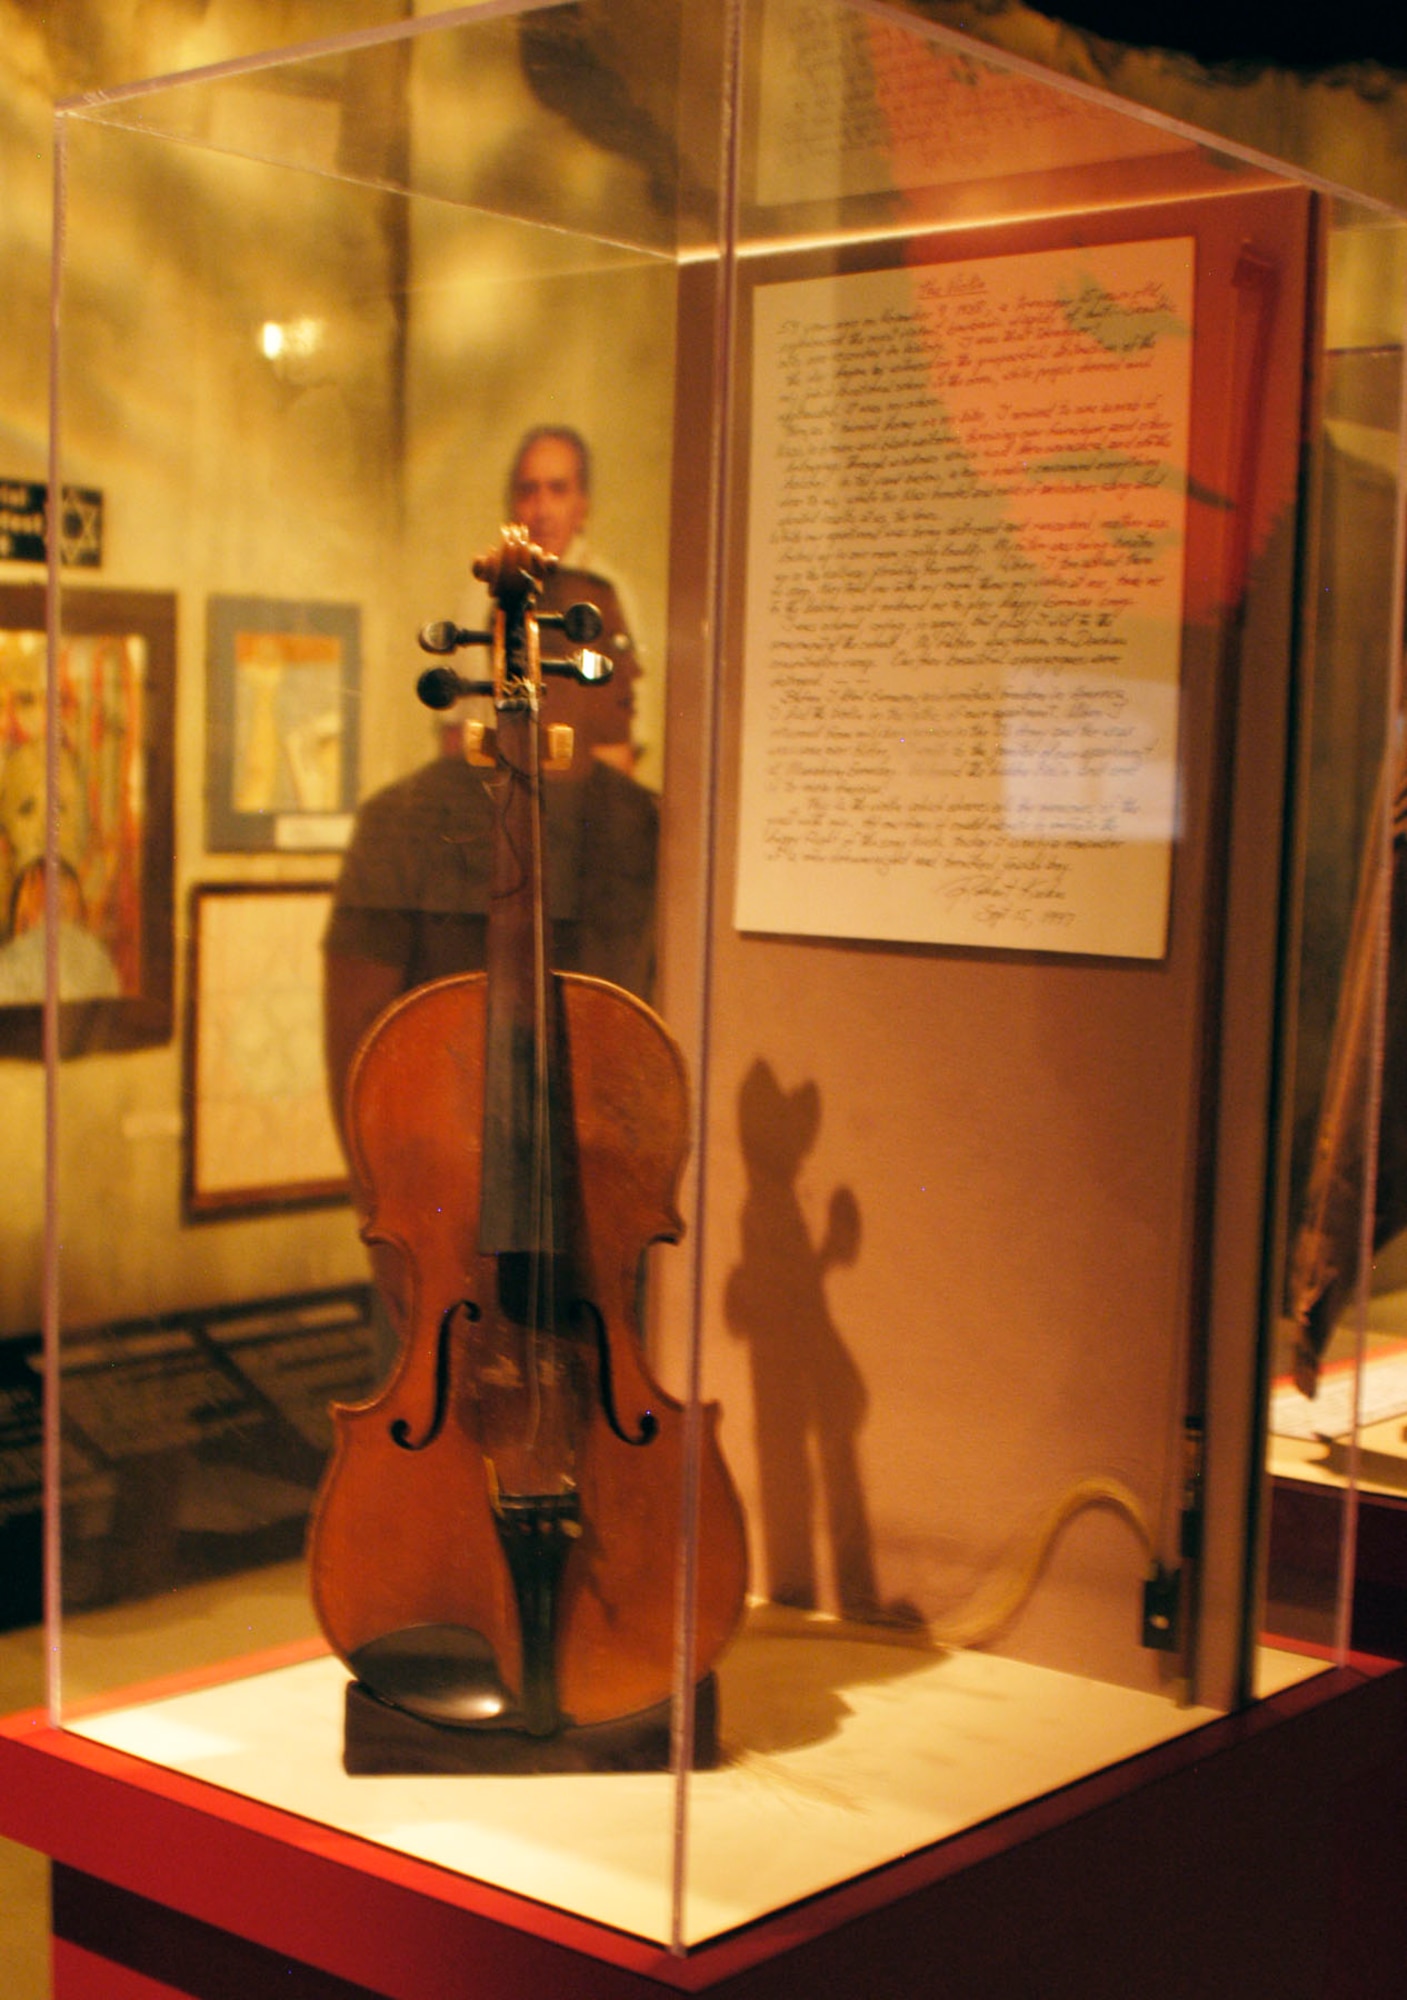 DAYTON, Ohio -- Violin in the "Prejudice & Memory: A Holocaust Exhibit" at the National Museum of the U.S. Air Force. (U.S. Air Force photo)